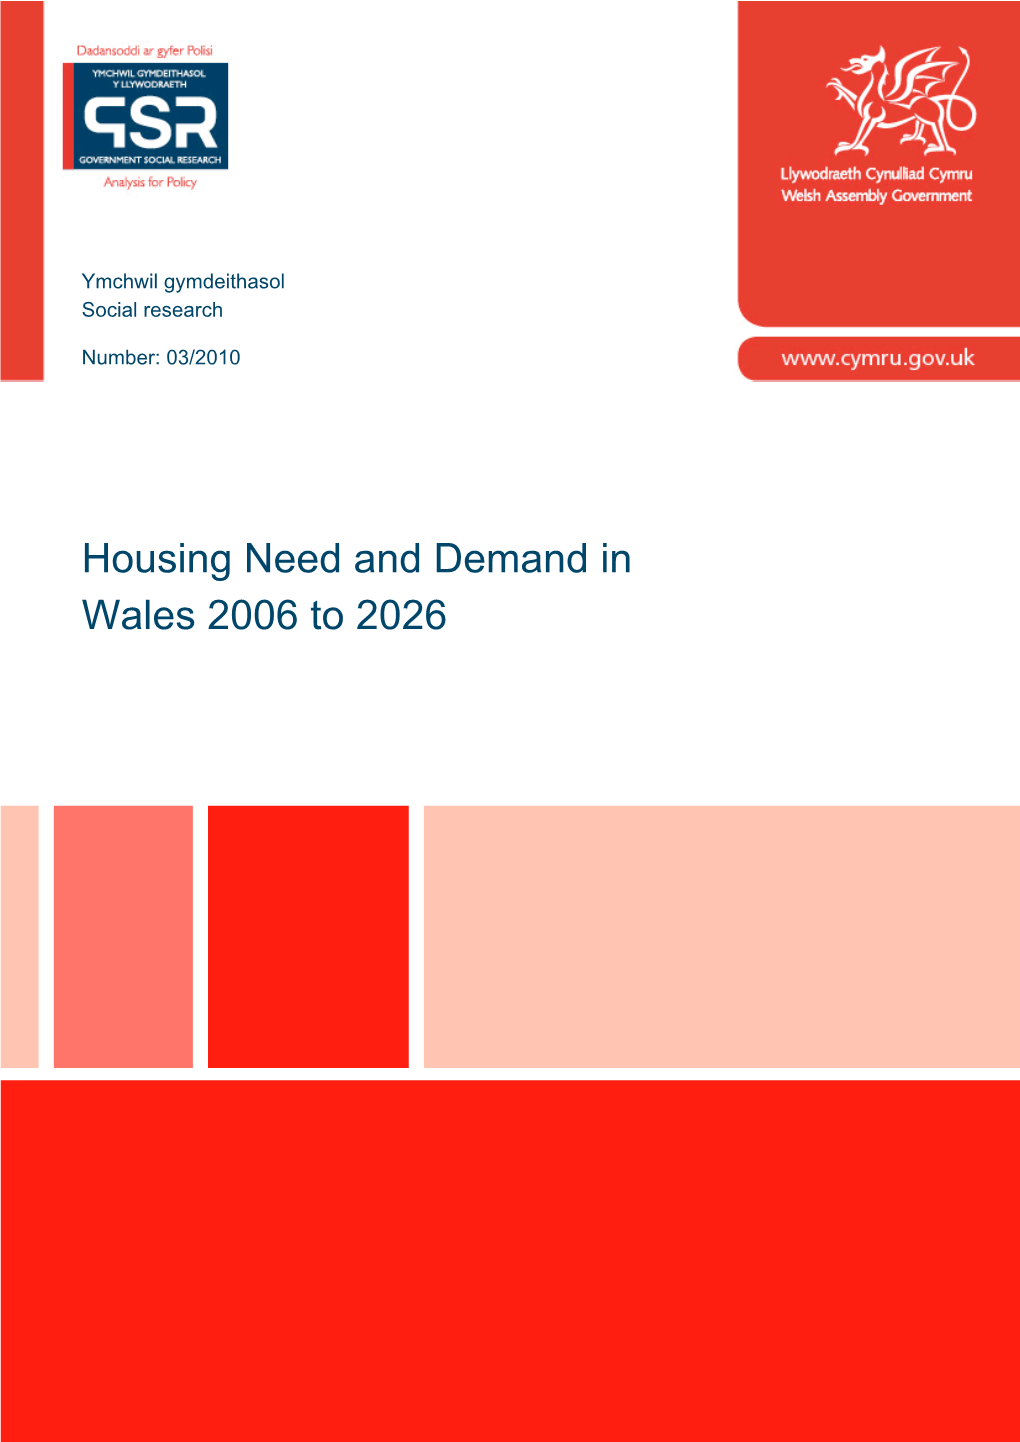 Housing Need and Demand in Wales 2006 to 2026